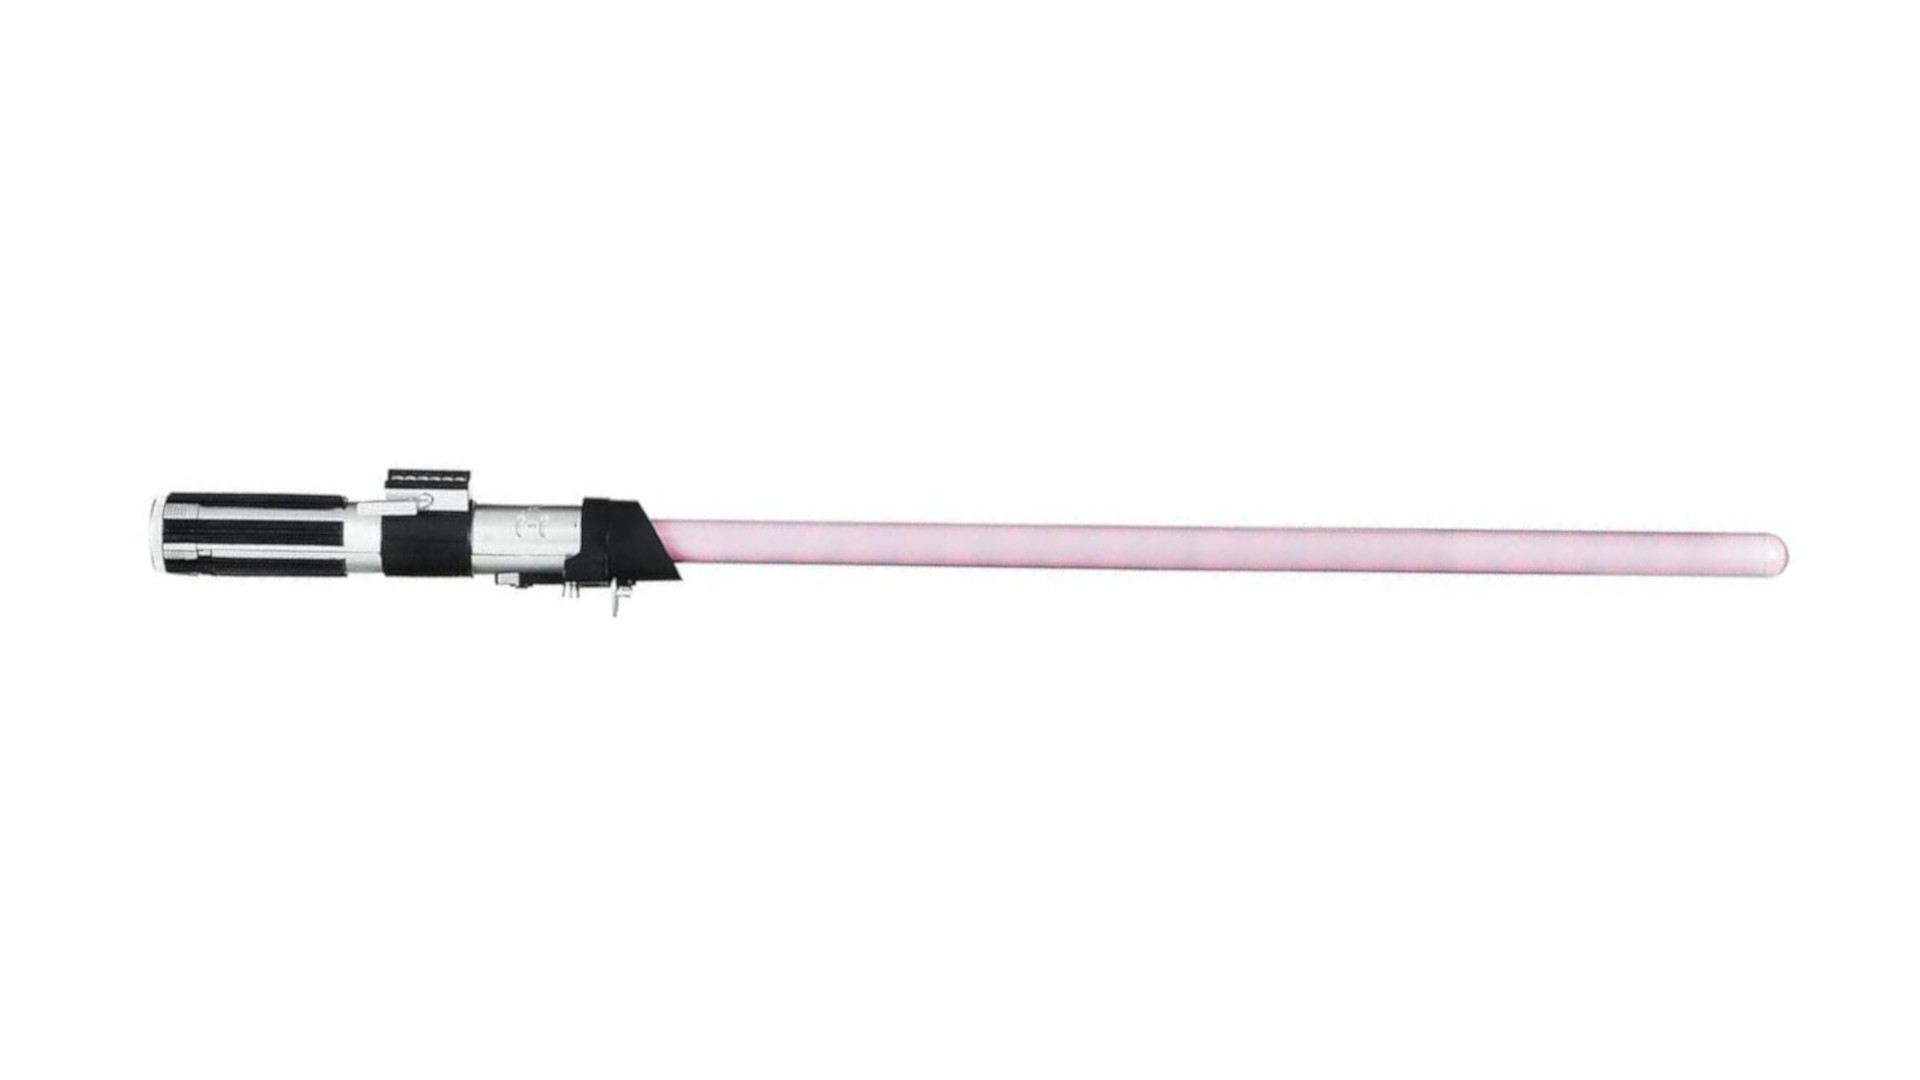 The color-changing Hasbro Darth Vader FX Lightsaber on a white background.